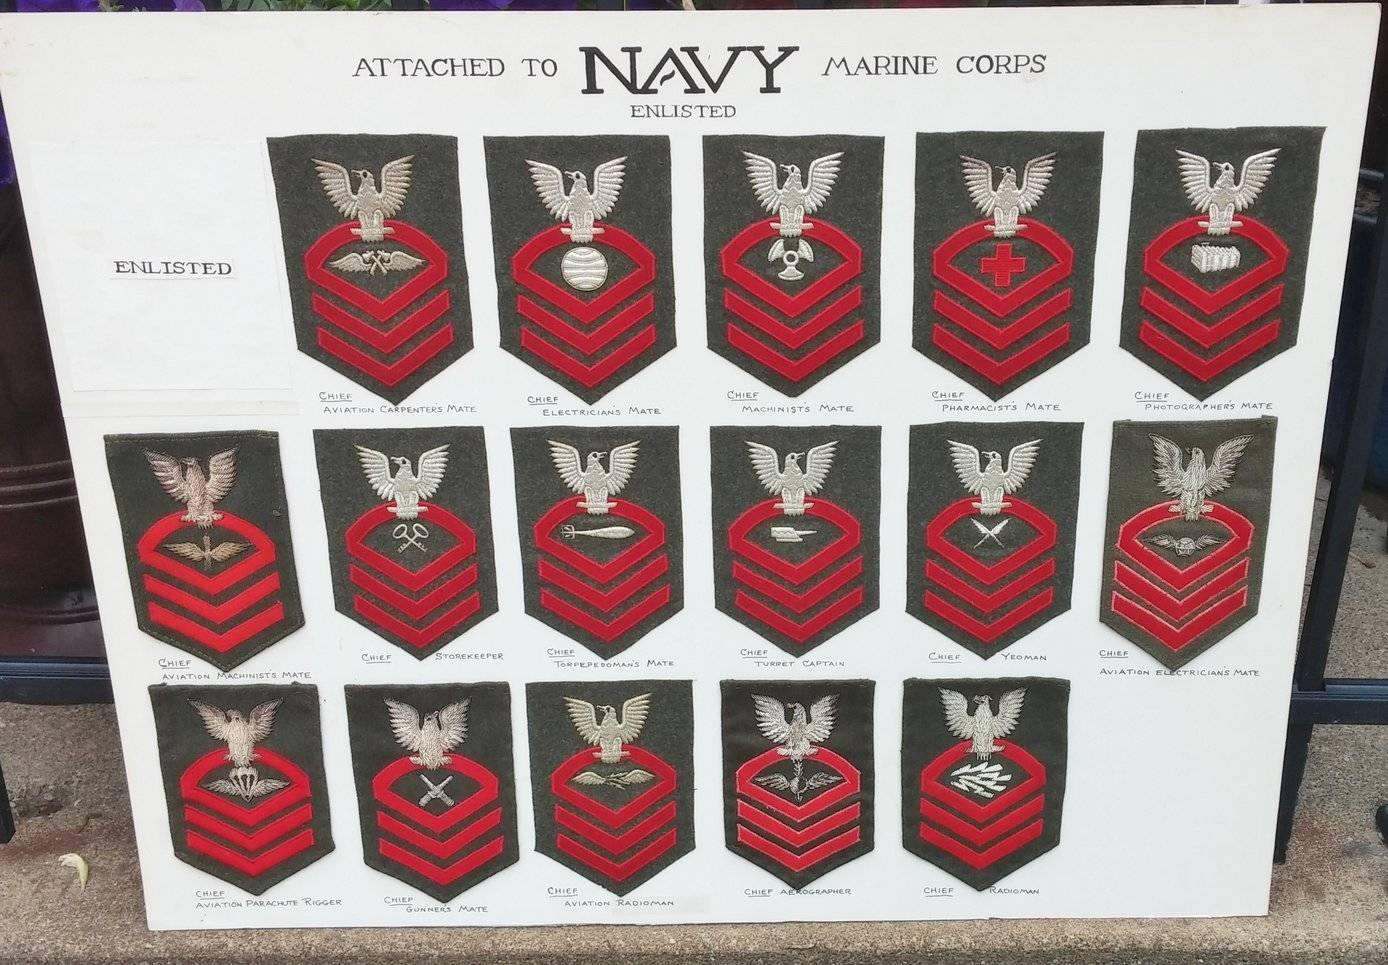 what is the navy equivalent to air war college